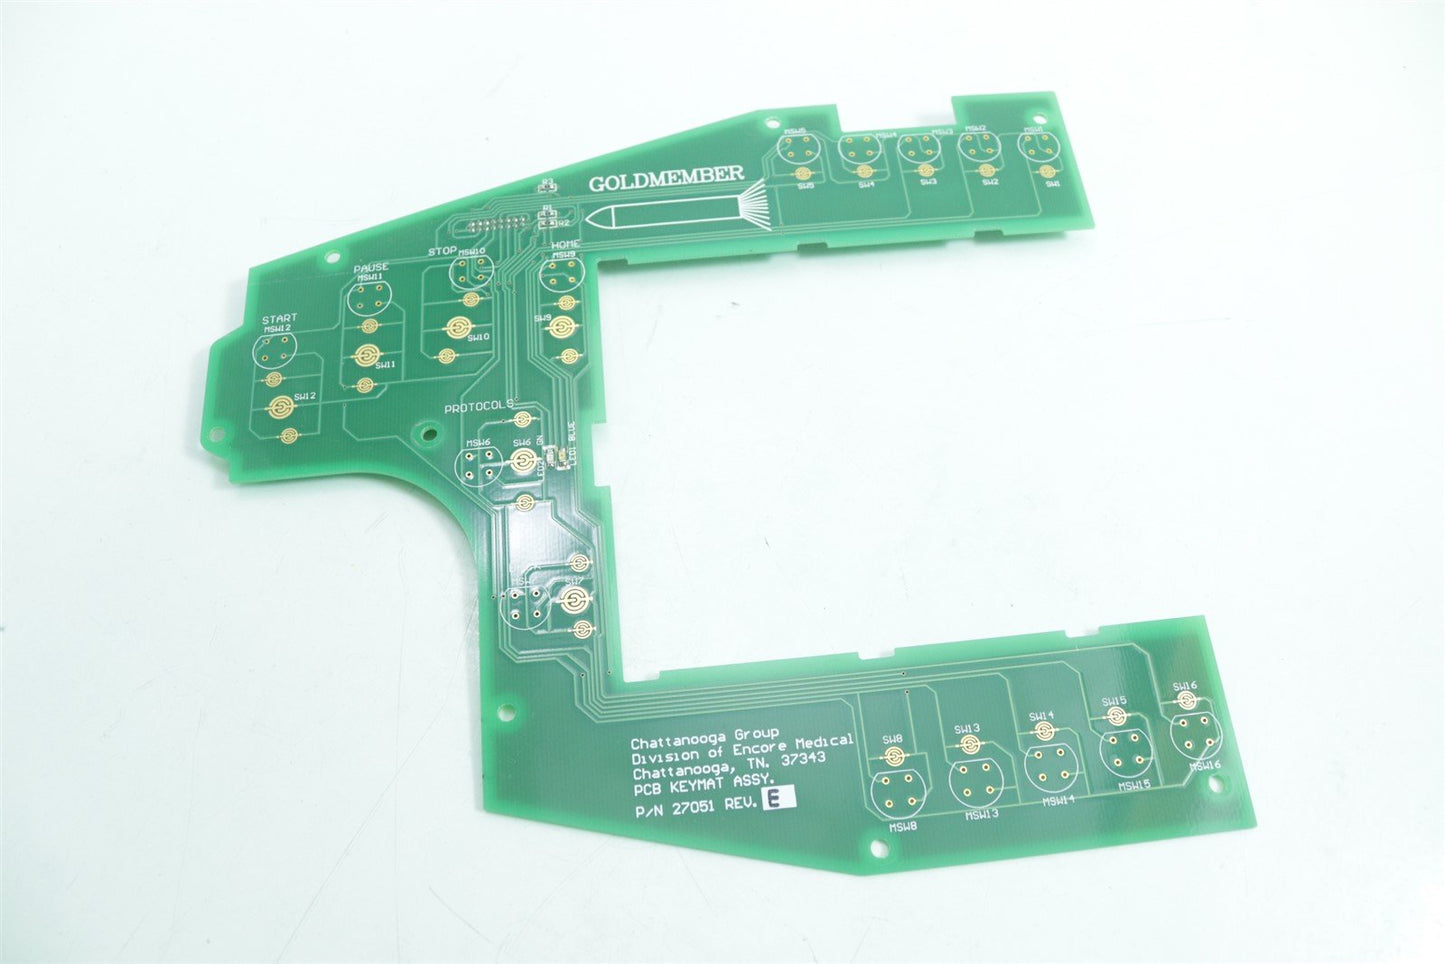 Chattanooga Group Intelect Advanced Color Combo 2752CC pcb keymat assy 27051